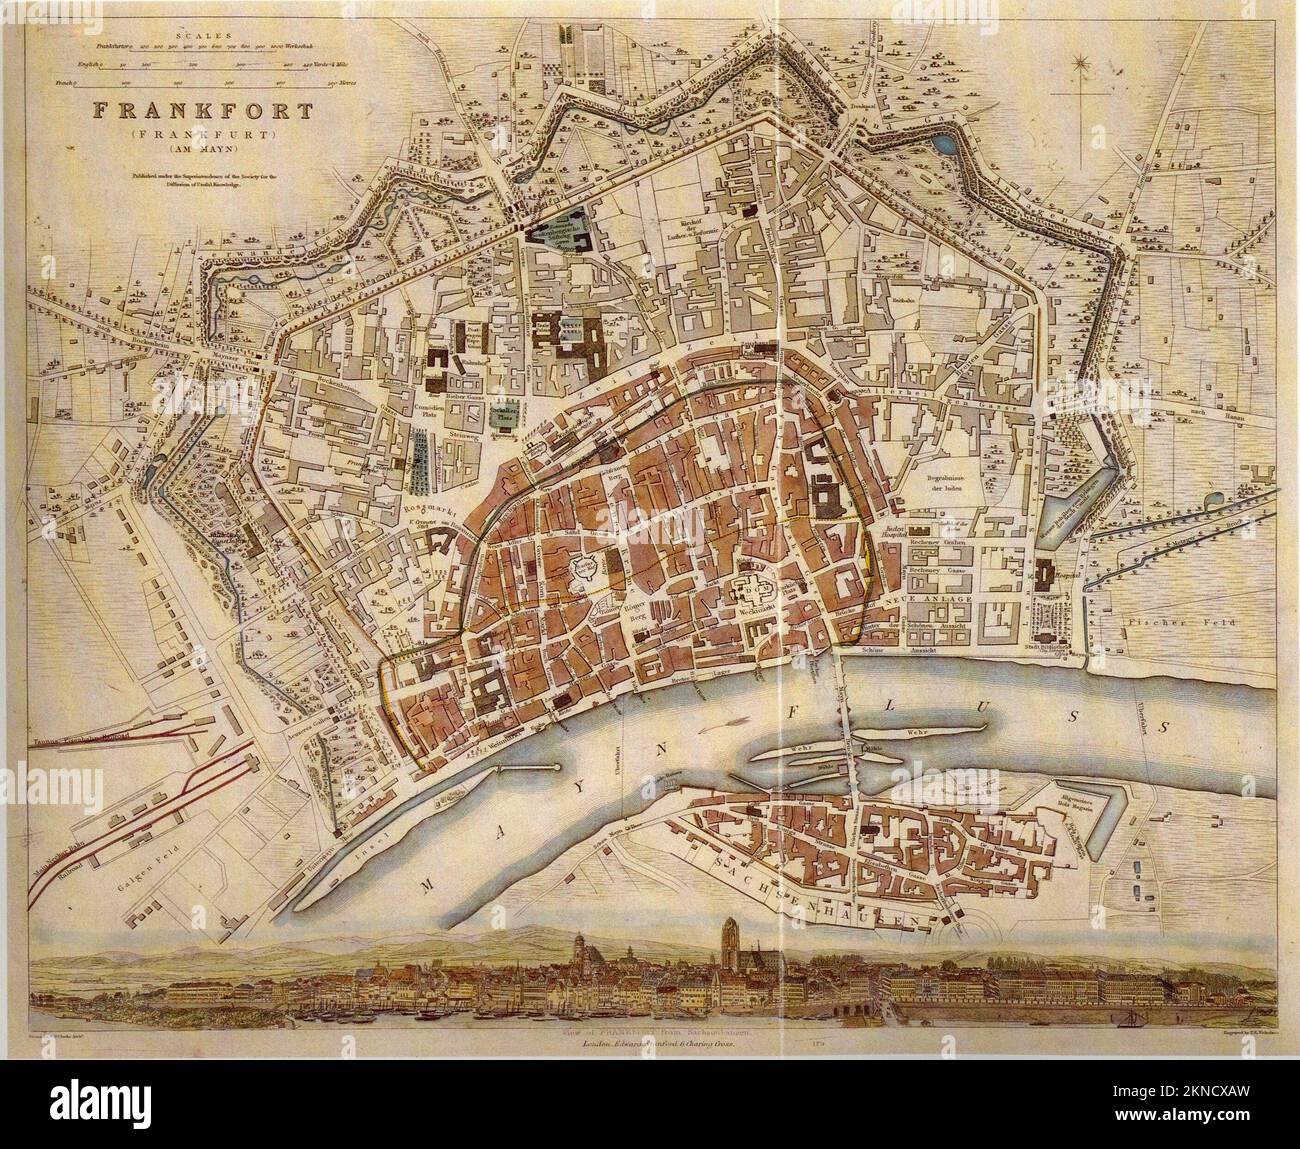 Vintage city plan of Frankfurt and area around it from 19th century. Maps are beautifully hand illustrated and engraved showing it at the time. Stock Photo